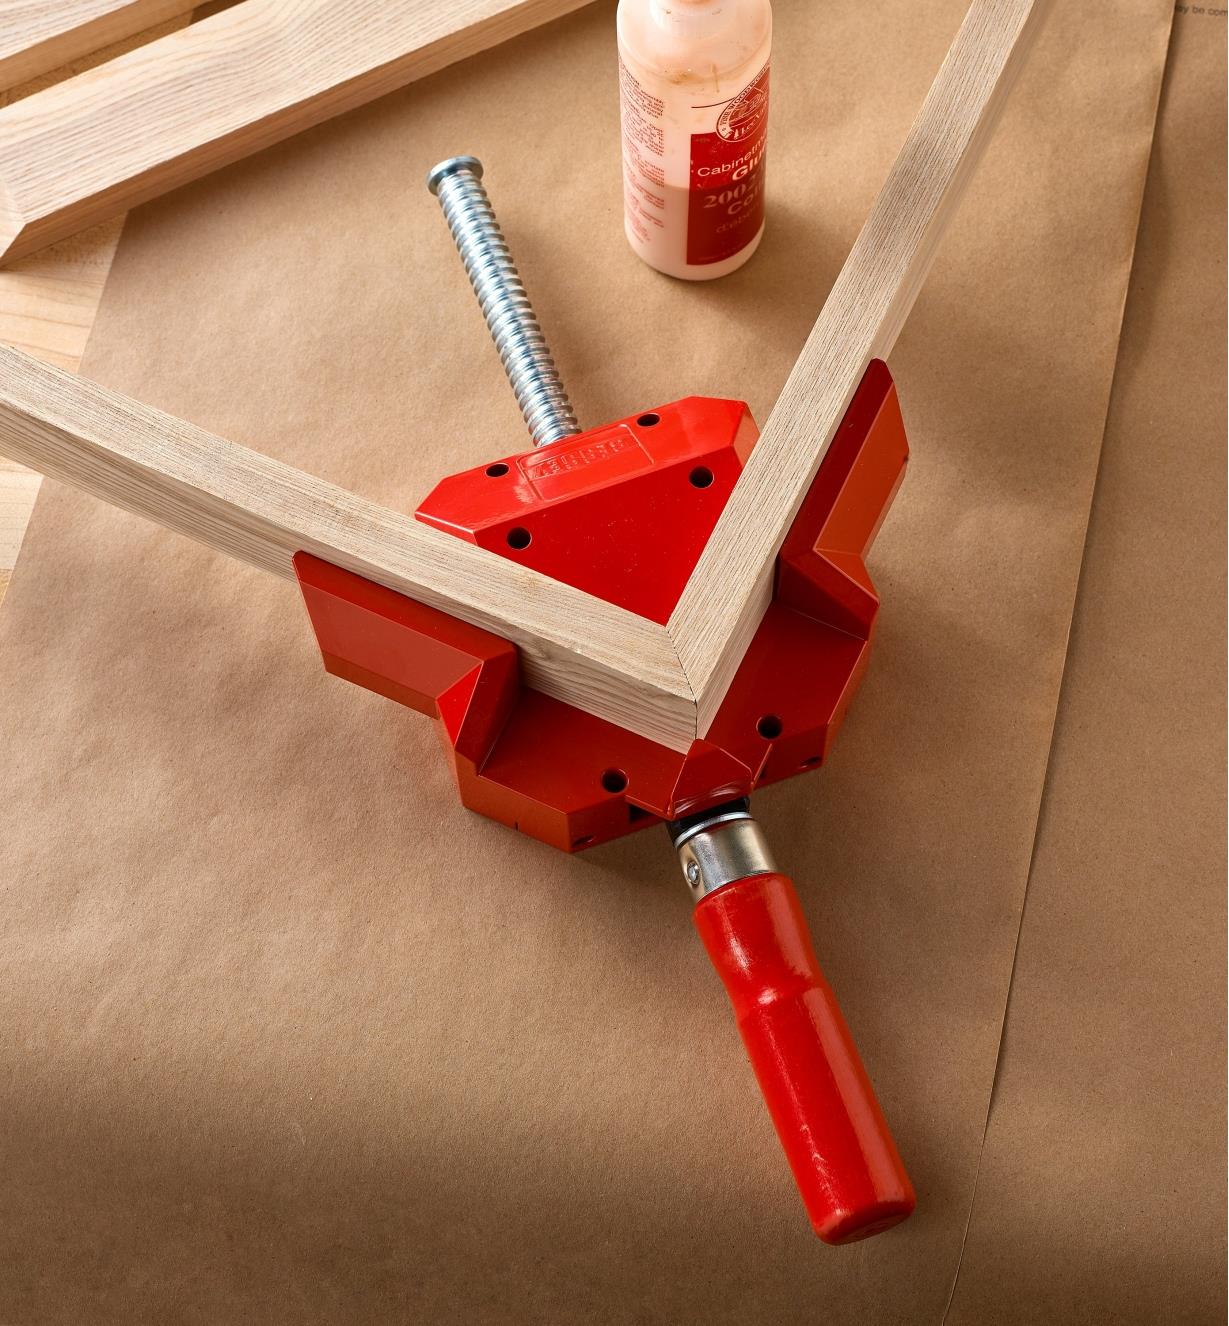 A Bessey corner and T clamp being used to hold a mitered corner for glue-up